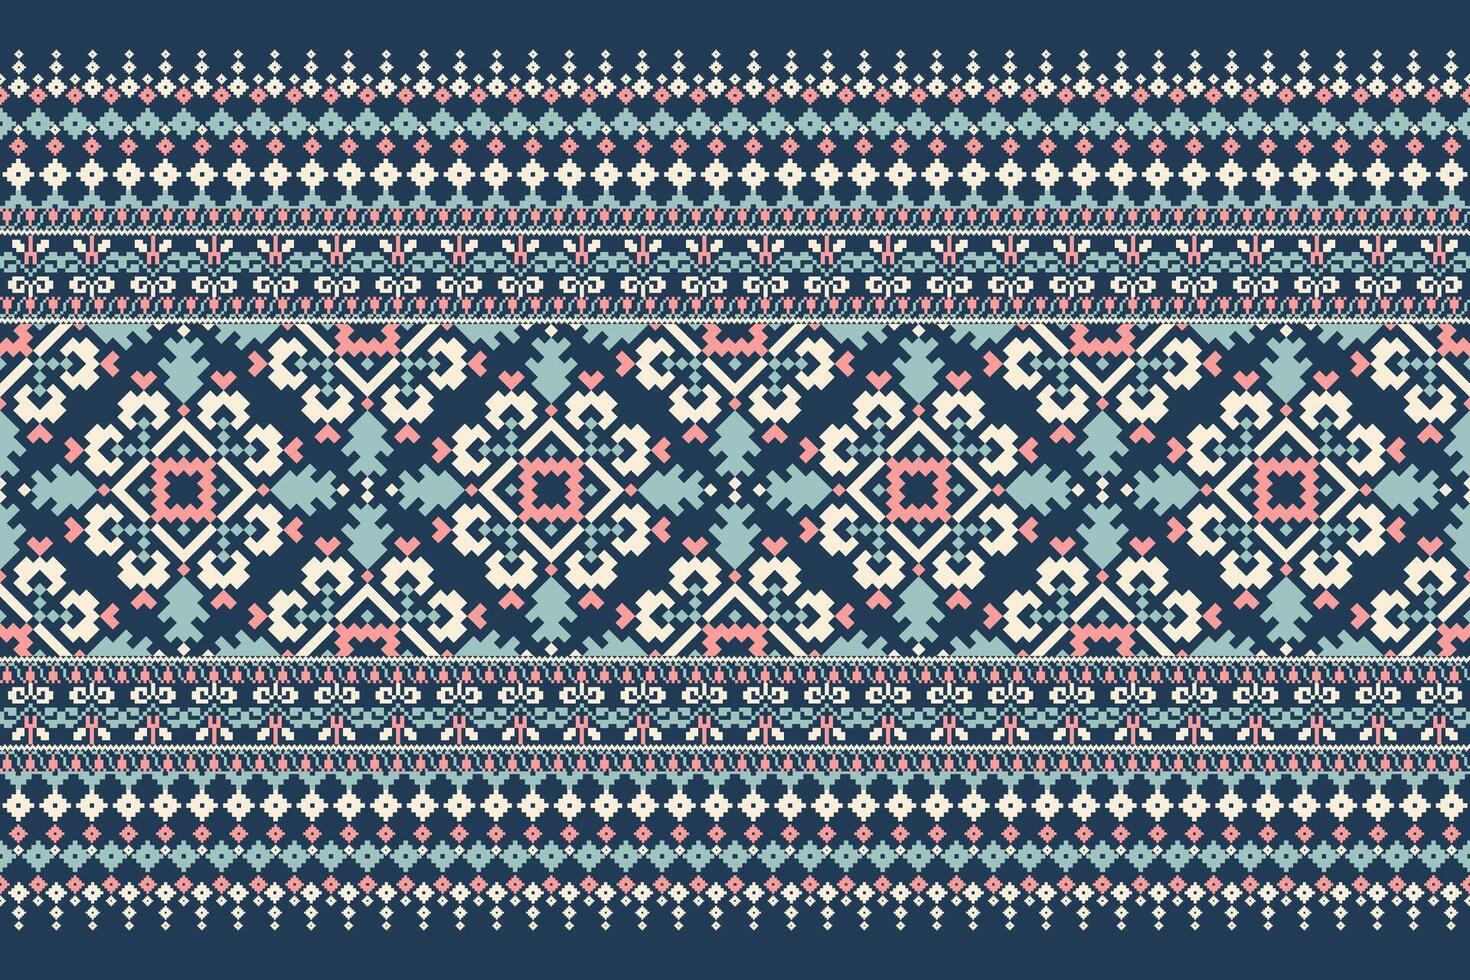 Floral Cross Stitch Embroidery on navy blue background.geometric ethnic oriental pattern vector illustration,Aztec style,abstract background.design for texture,fabric,clothing,decoration,sarong,scarf.